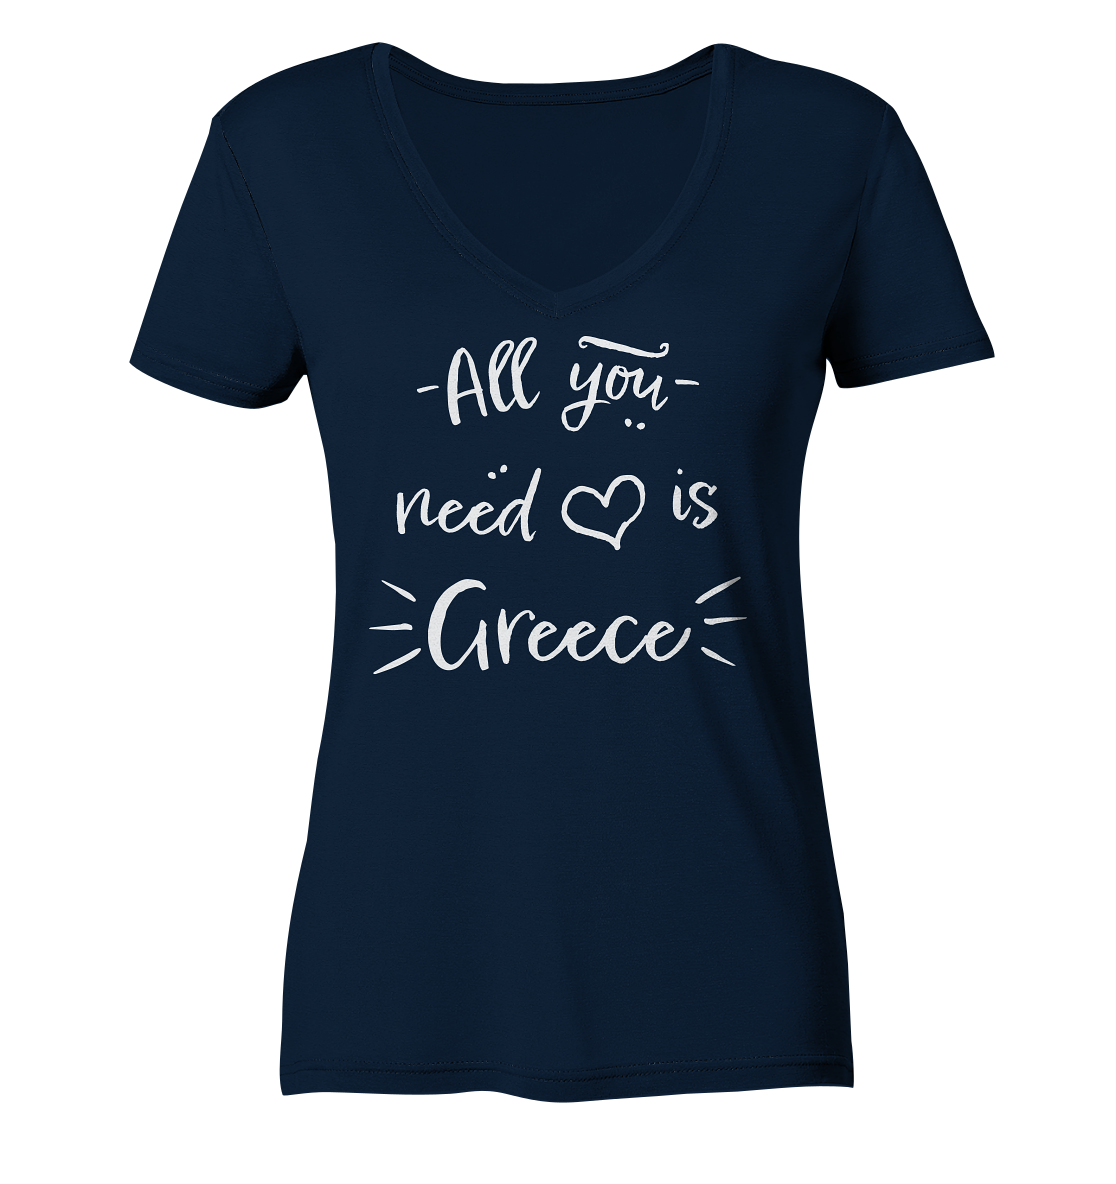 All you need is Greece - Ladies Organic V-Neck Shirt